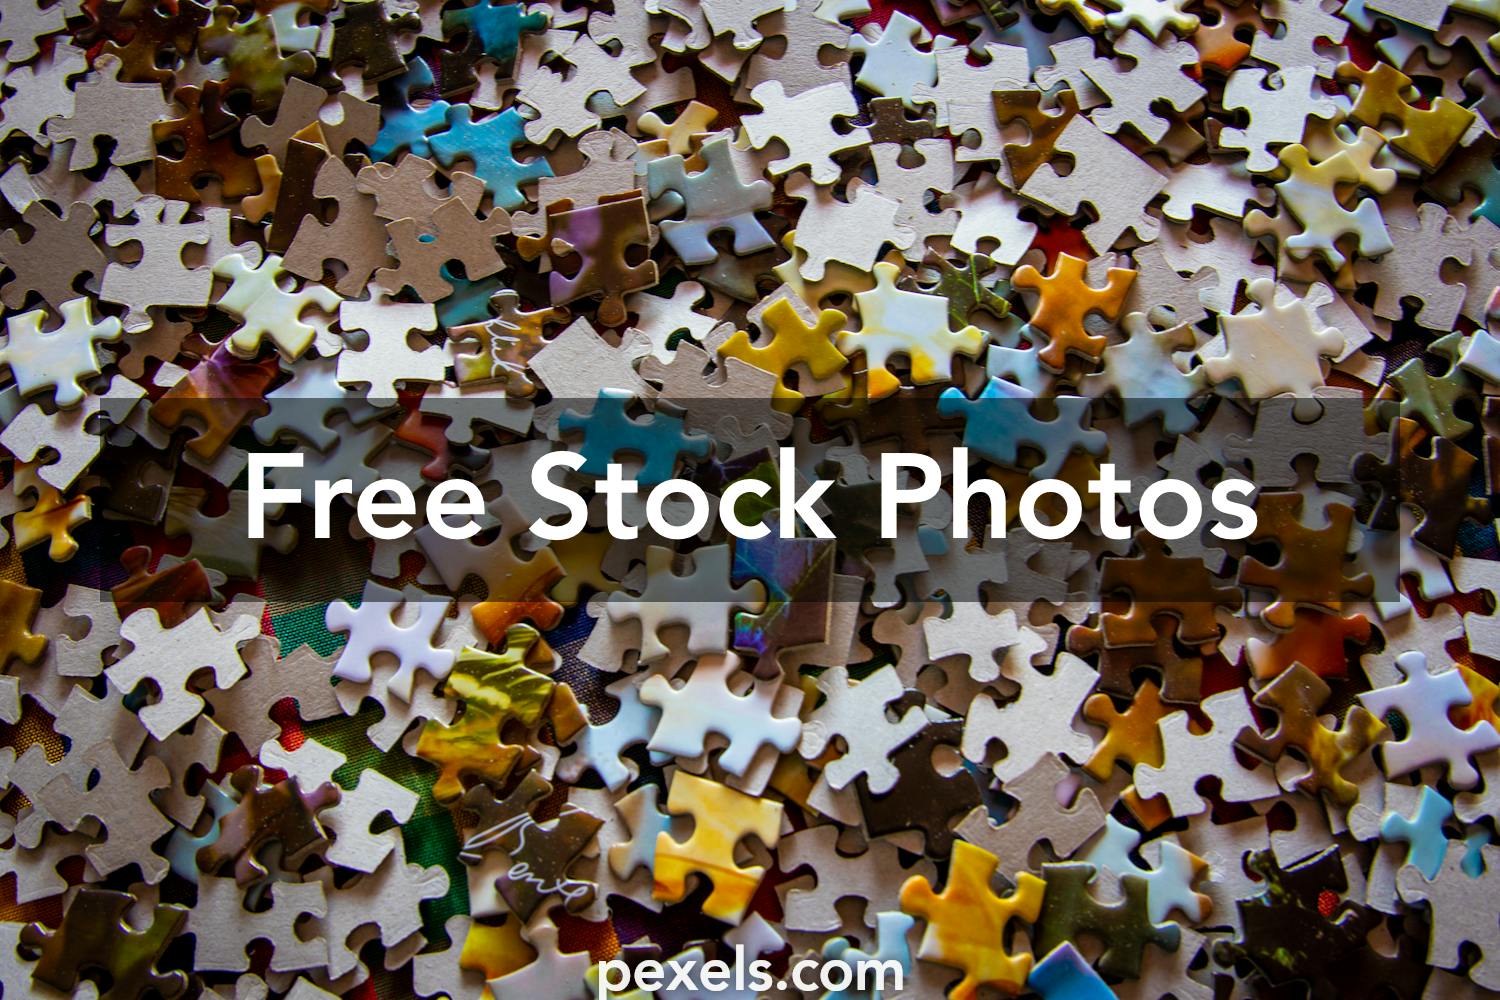 cycle Army Heir Puzzle Pieces Photos, Download Free Puzzle Pieces Stock Photos & HD Images